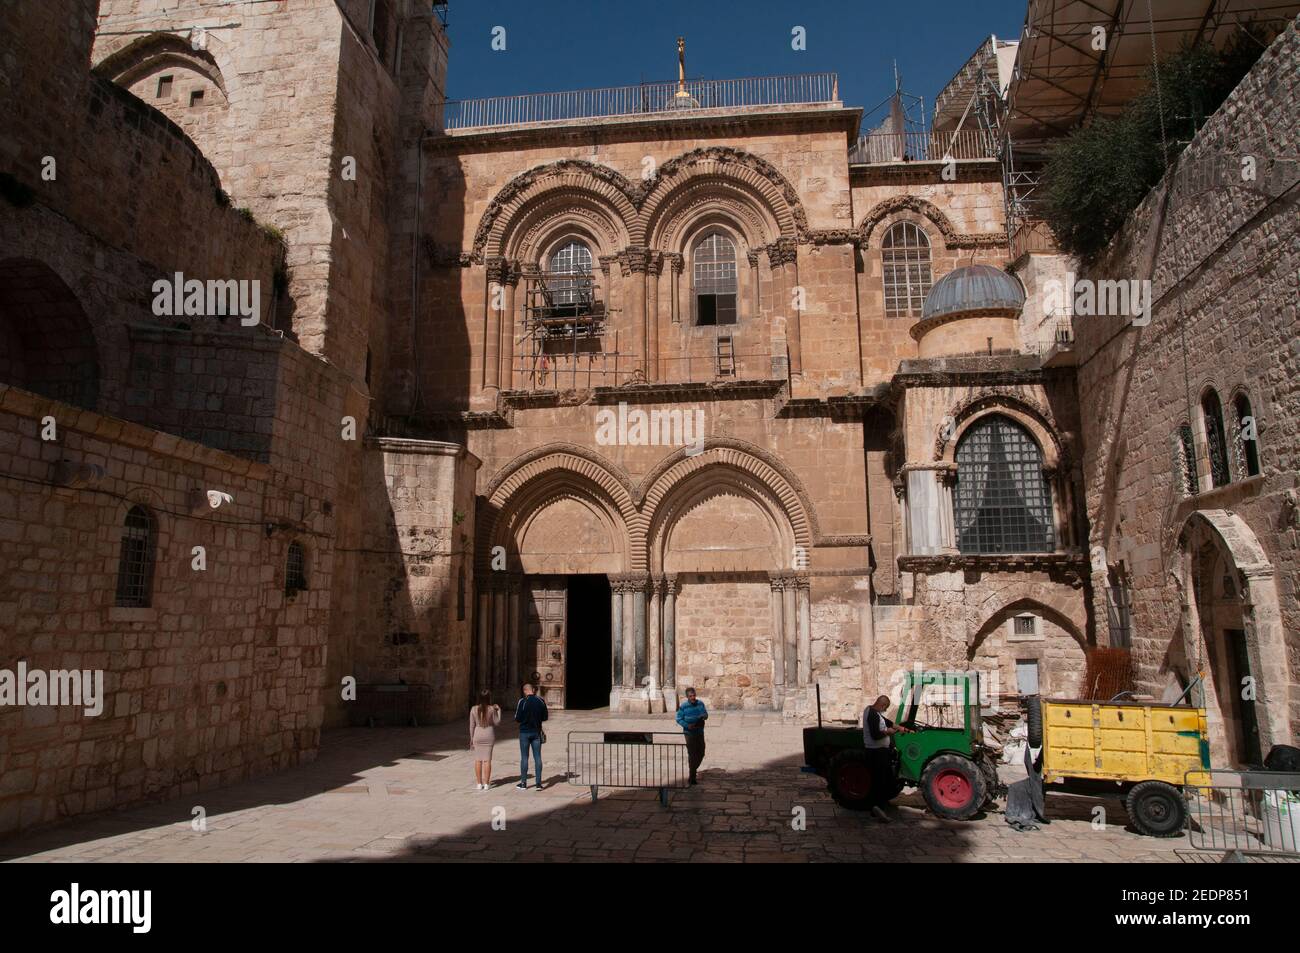 The entrance to the Church of the Holy Sepulchre, Jerusalem, Israel Stock Photo